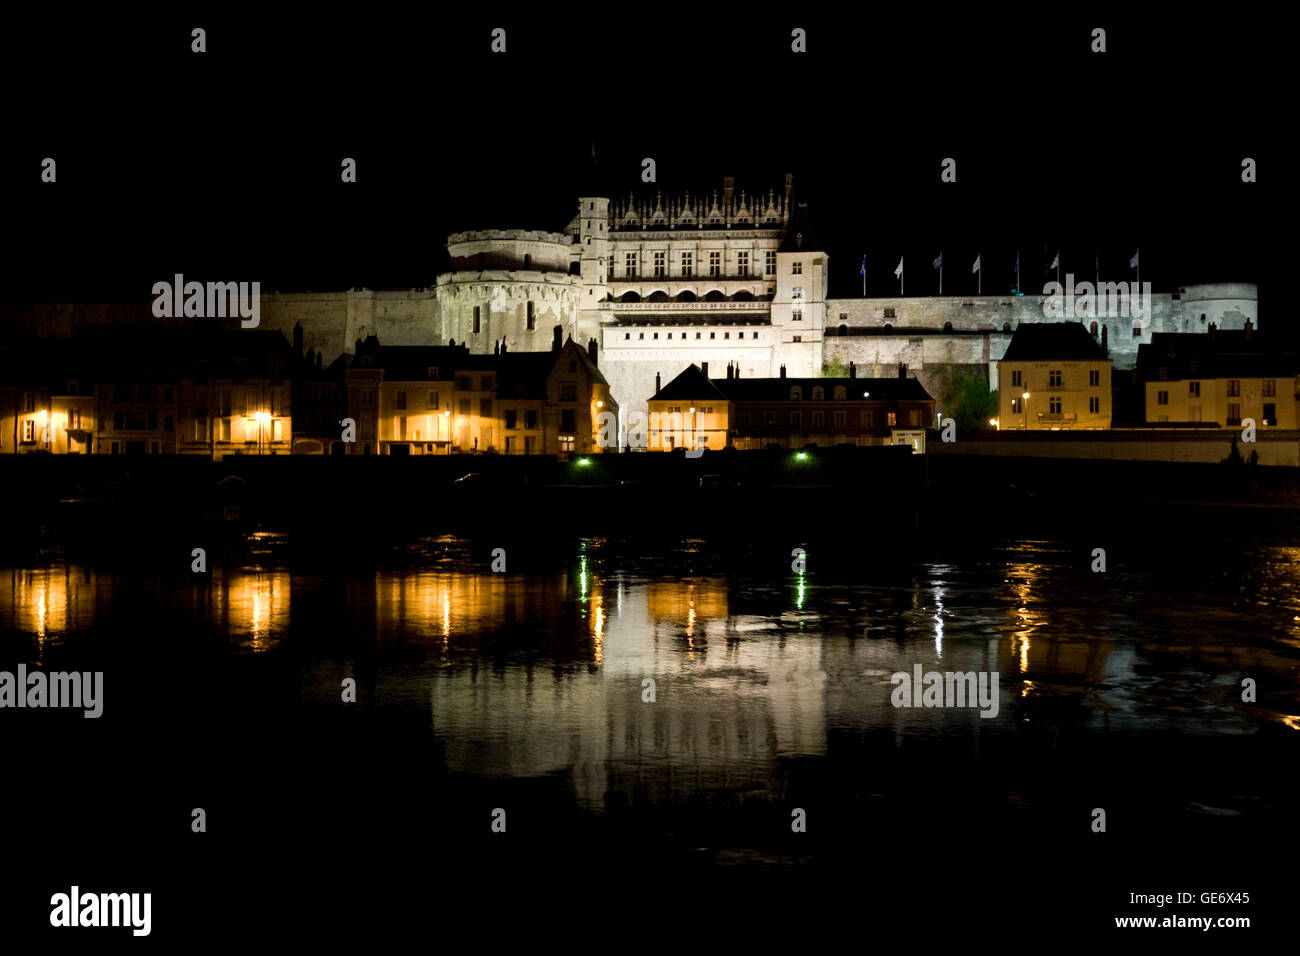 Nighttime view of the Amboise castle and the Loire river in France, 26 June 2008. Stock Photo